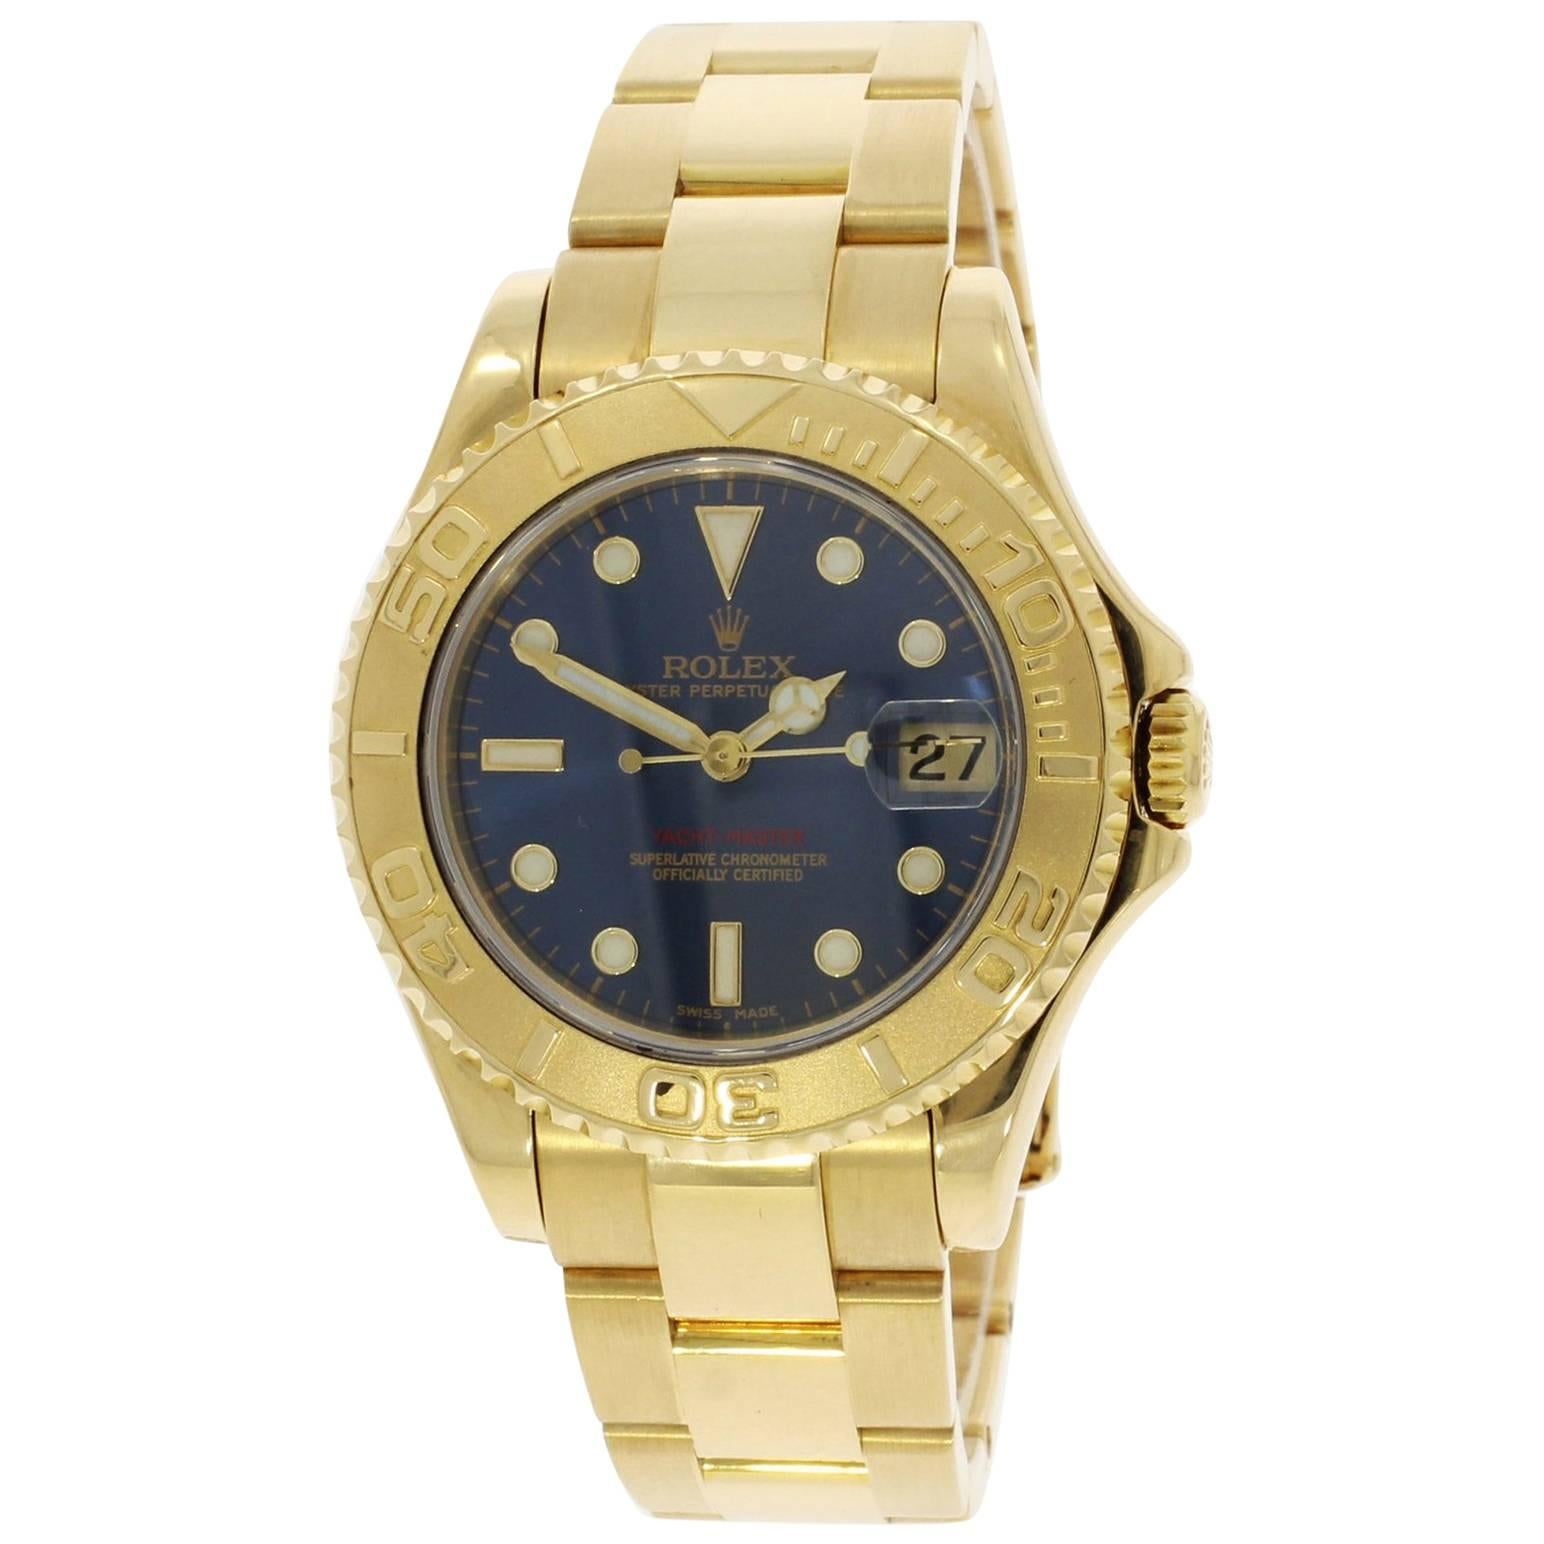 Rolex Yellow Gold Yachtmaster Blue Dial Wristwatch Ref 168628, 2001